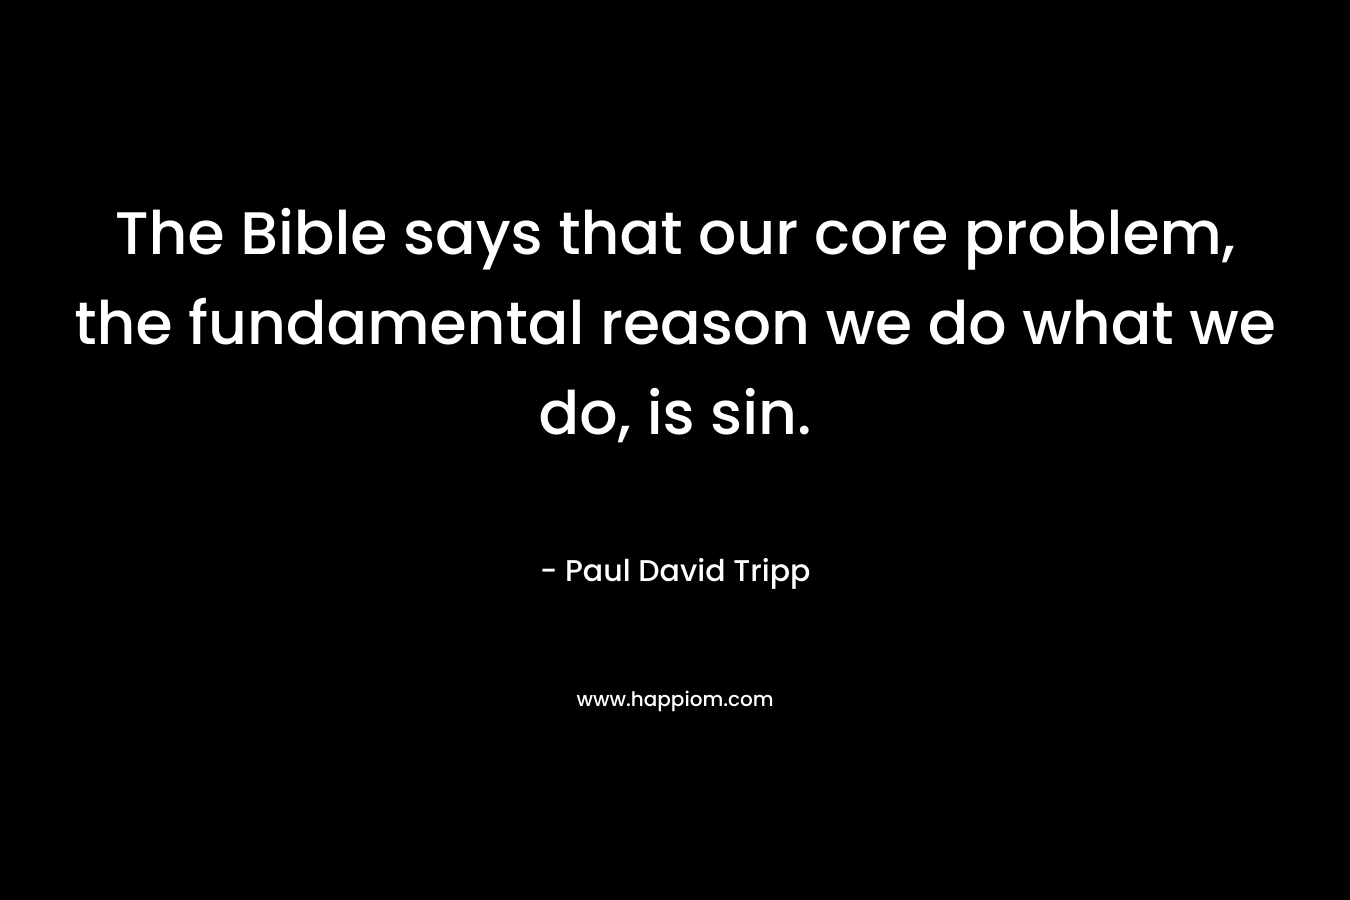 The Bible says that our core problem, the fundamental reason we do what we do, is sin.